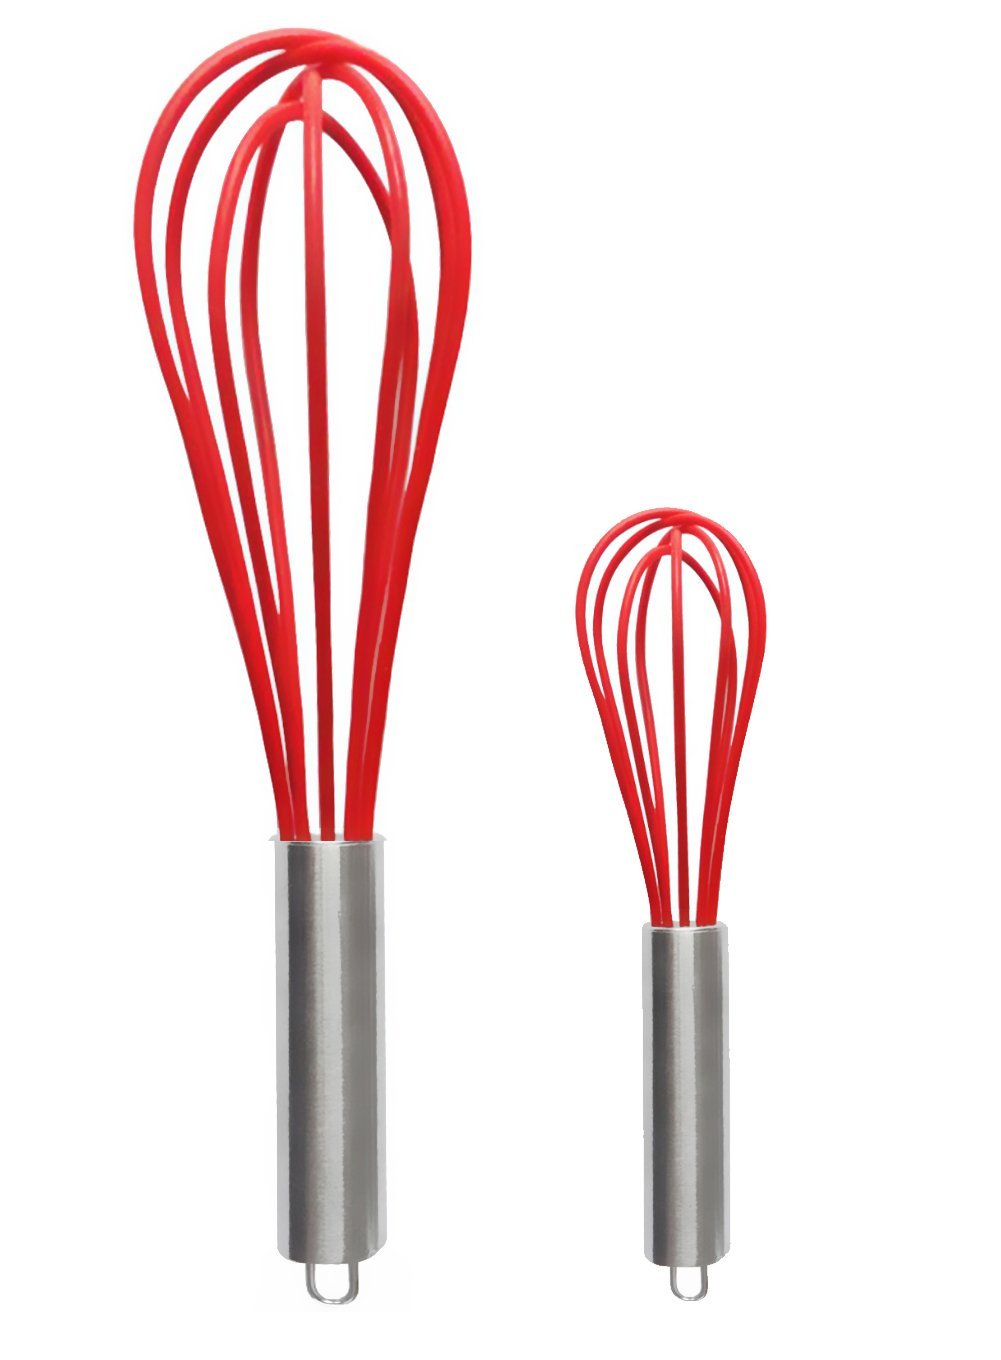 Freshware Colorful Silicone Whisks, Balloon Whisk Set, Wire Whisk, Egg